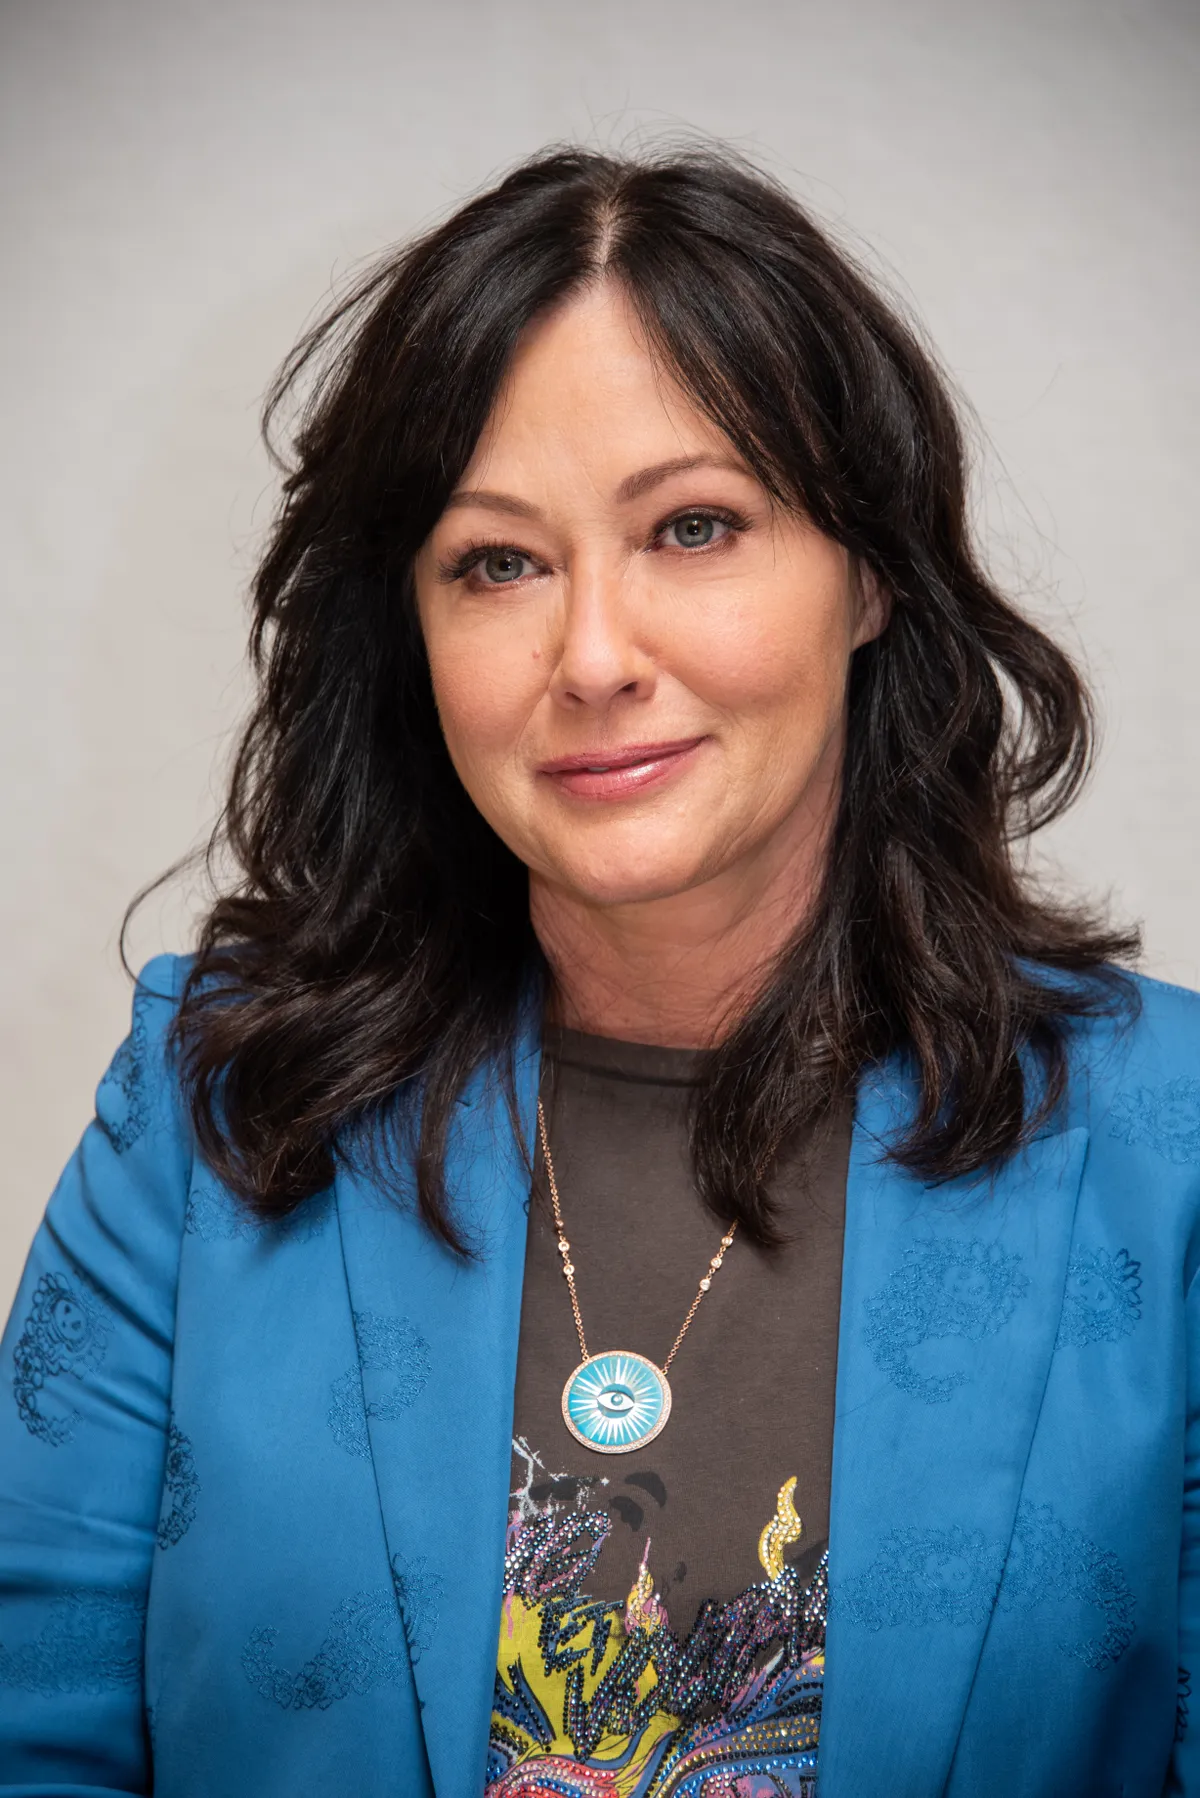 Shannen Doherty at the "BH90210" Press Conference, hosted at the Four Seasons Hotel in Beverly Hills, California, on August 8, 2019 | Source: Getty Images